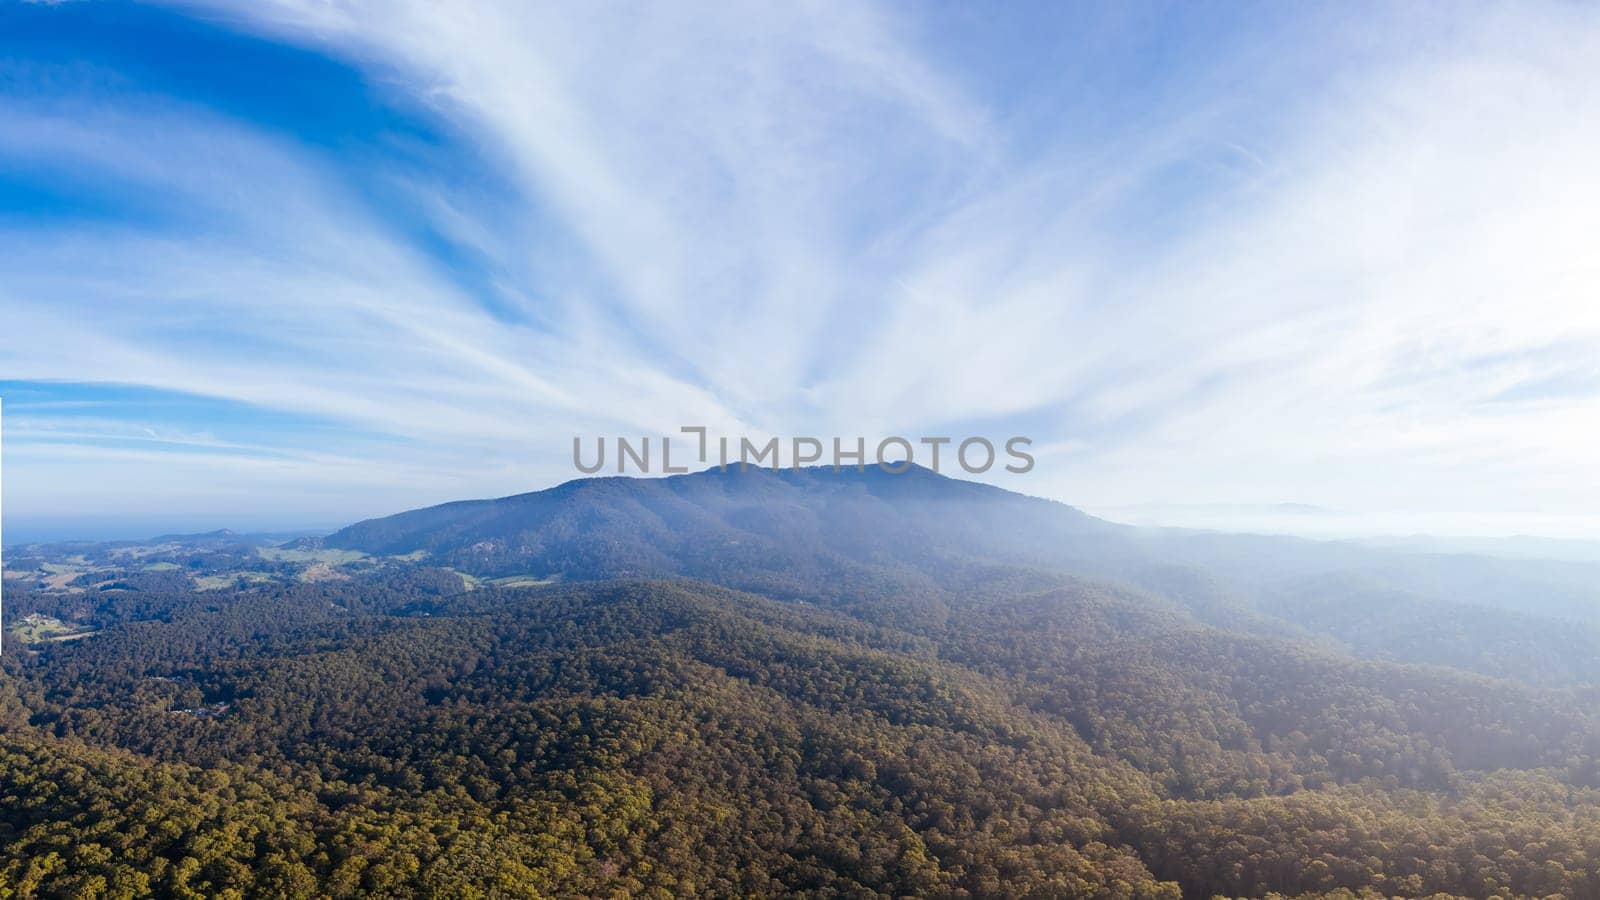 Aerial view near Central Tilba of Mount Dromedary in Gulaga National Park in New South Wales, Australia